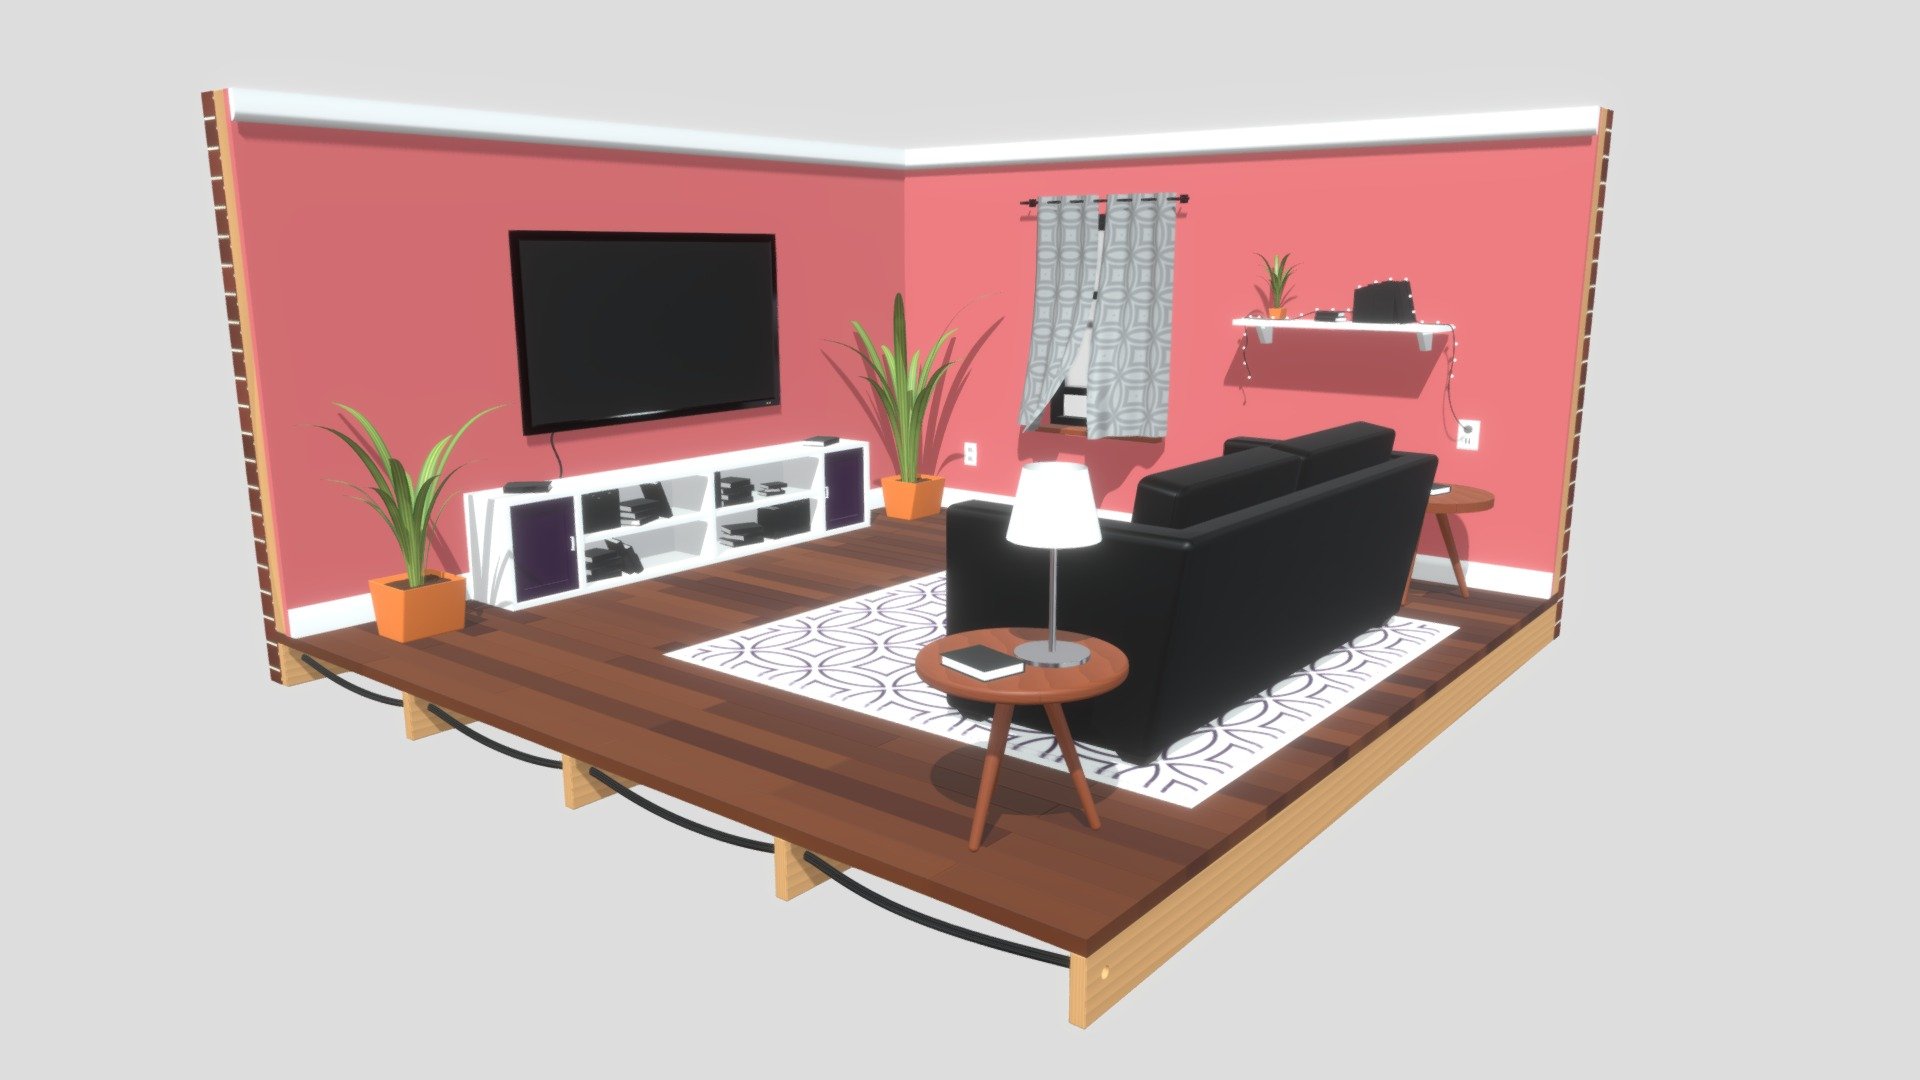 Simple low poly living room made using blender. This scene has a TV, an entertainment centre table, side tables, books, book shelf, plants, a couch, a rag, a lamp and a decoration light 3d model